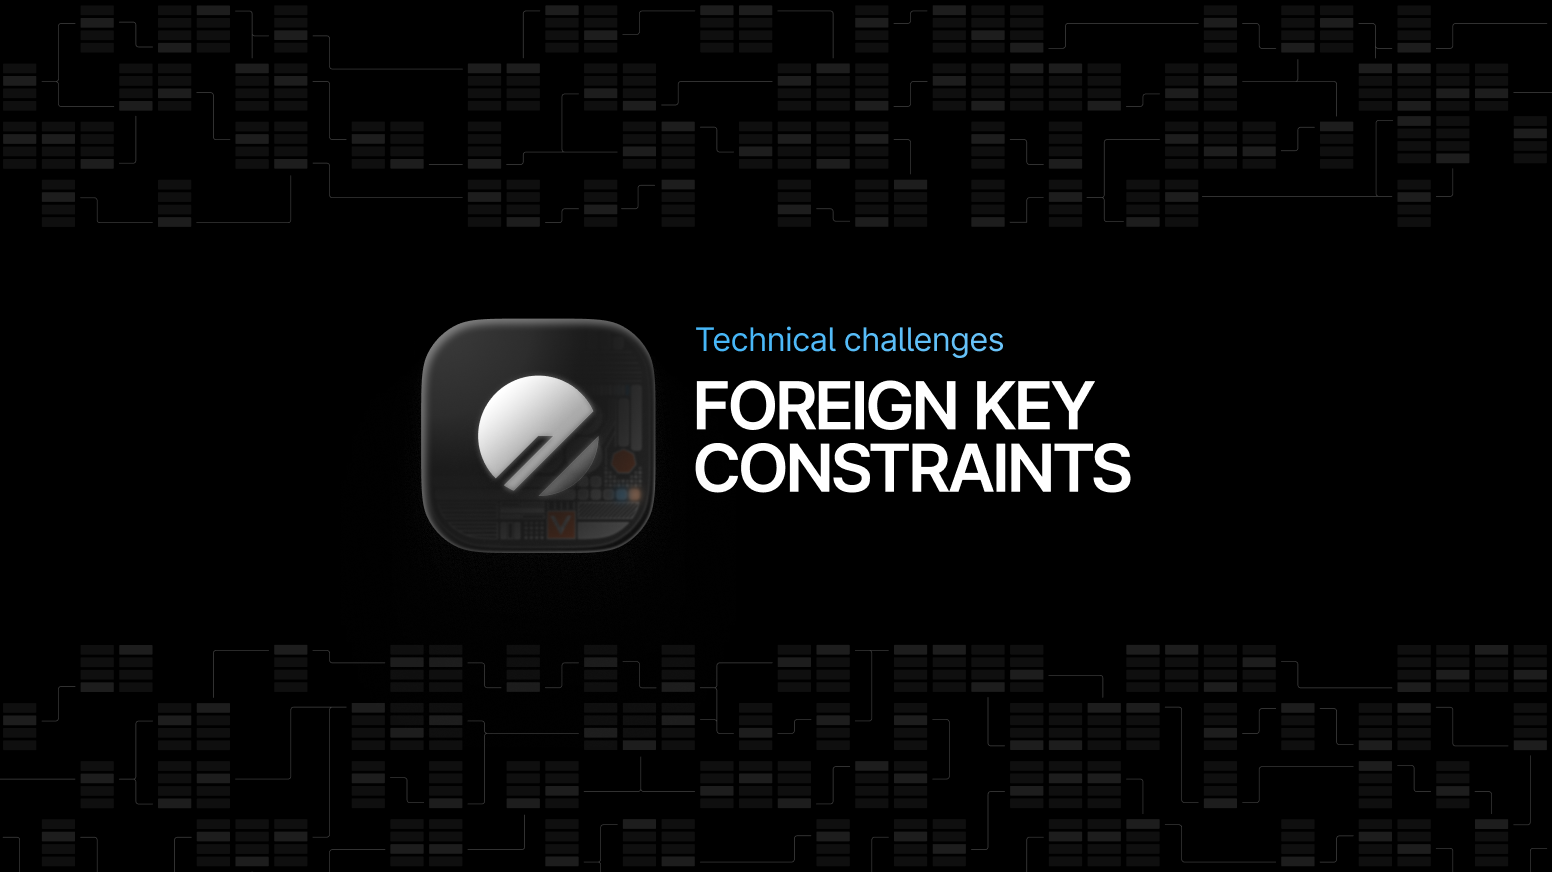 The challenges of supporting foreign key constraints